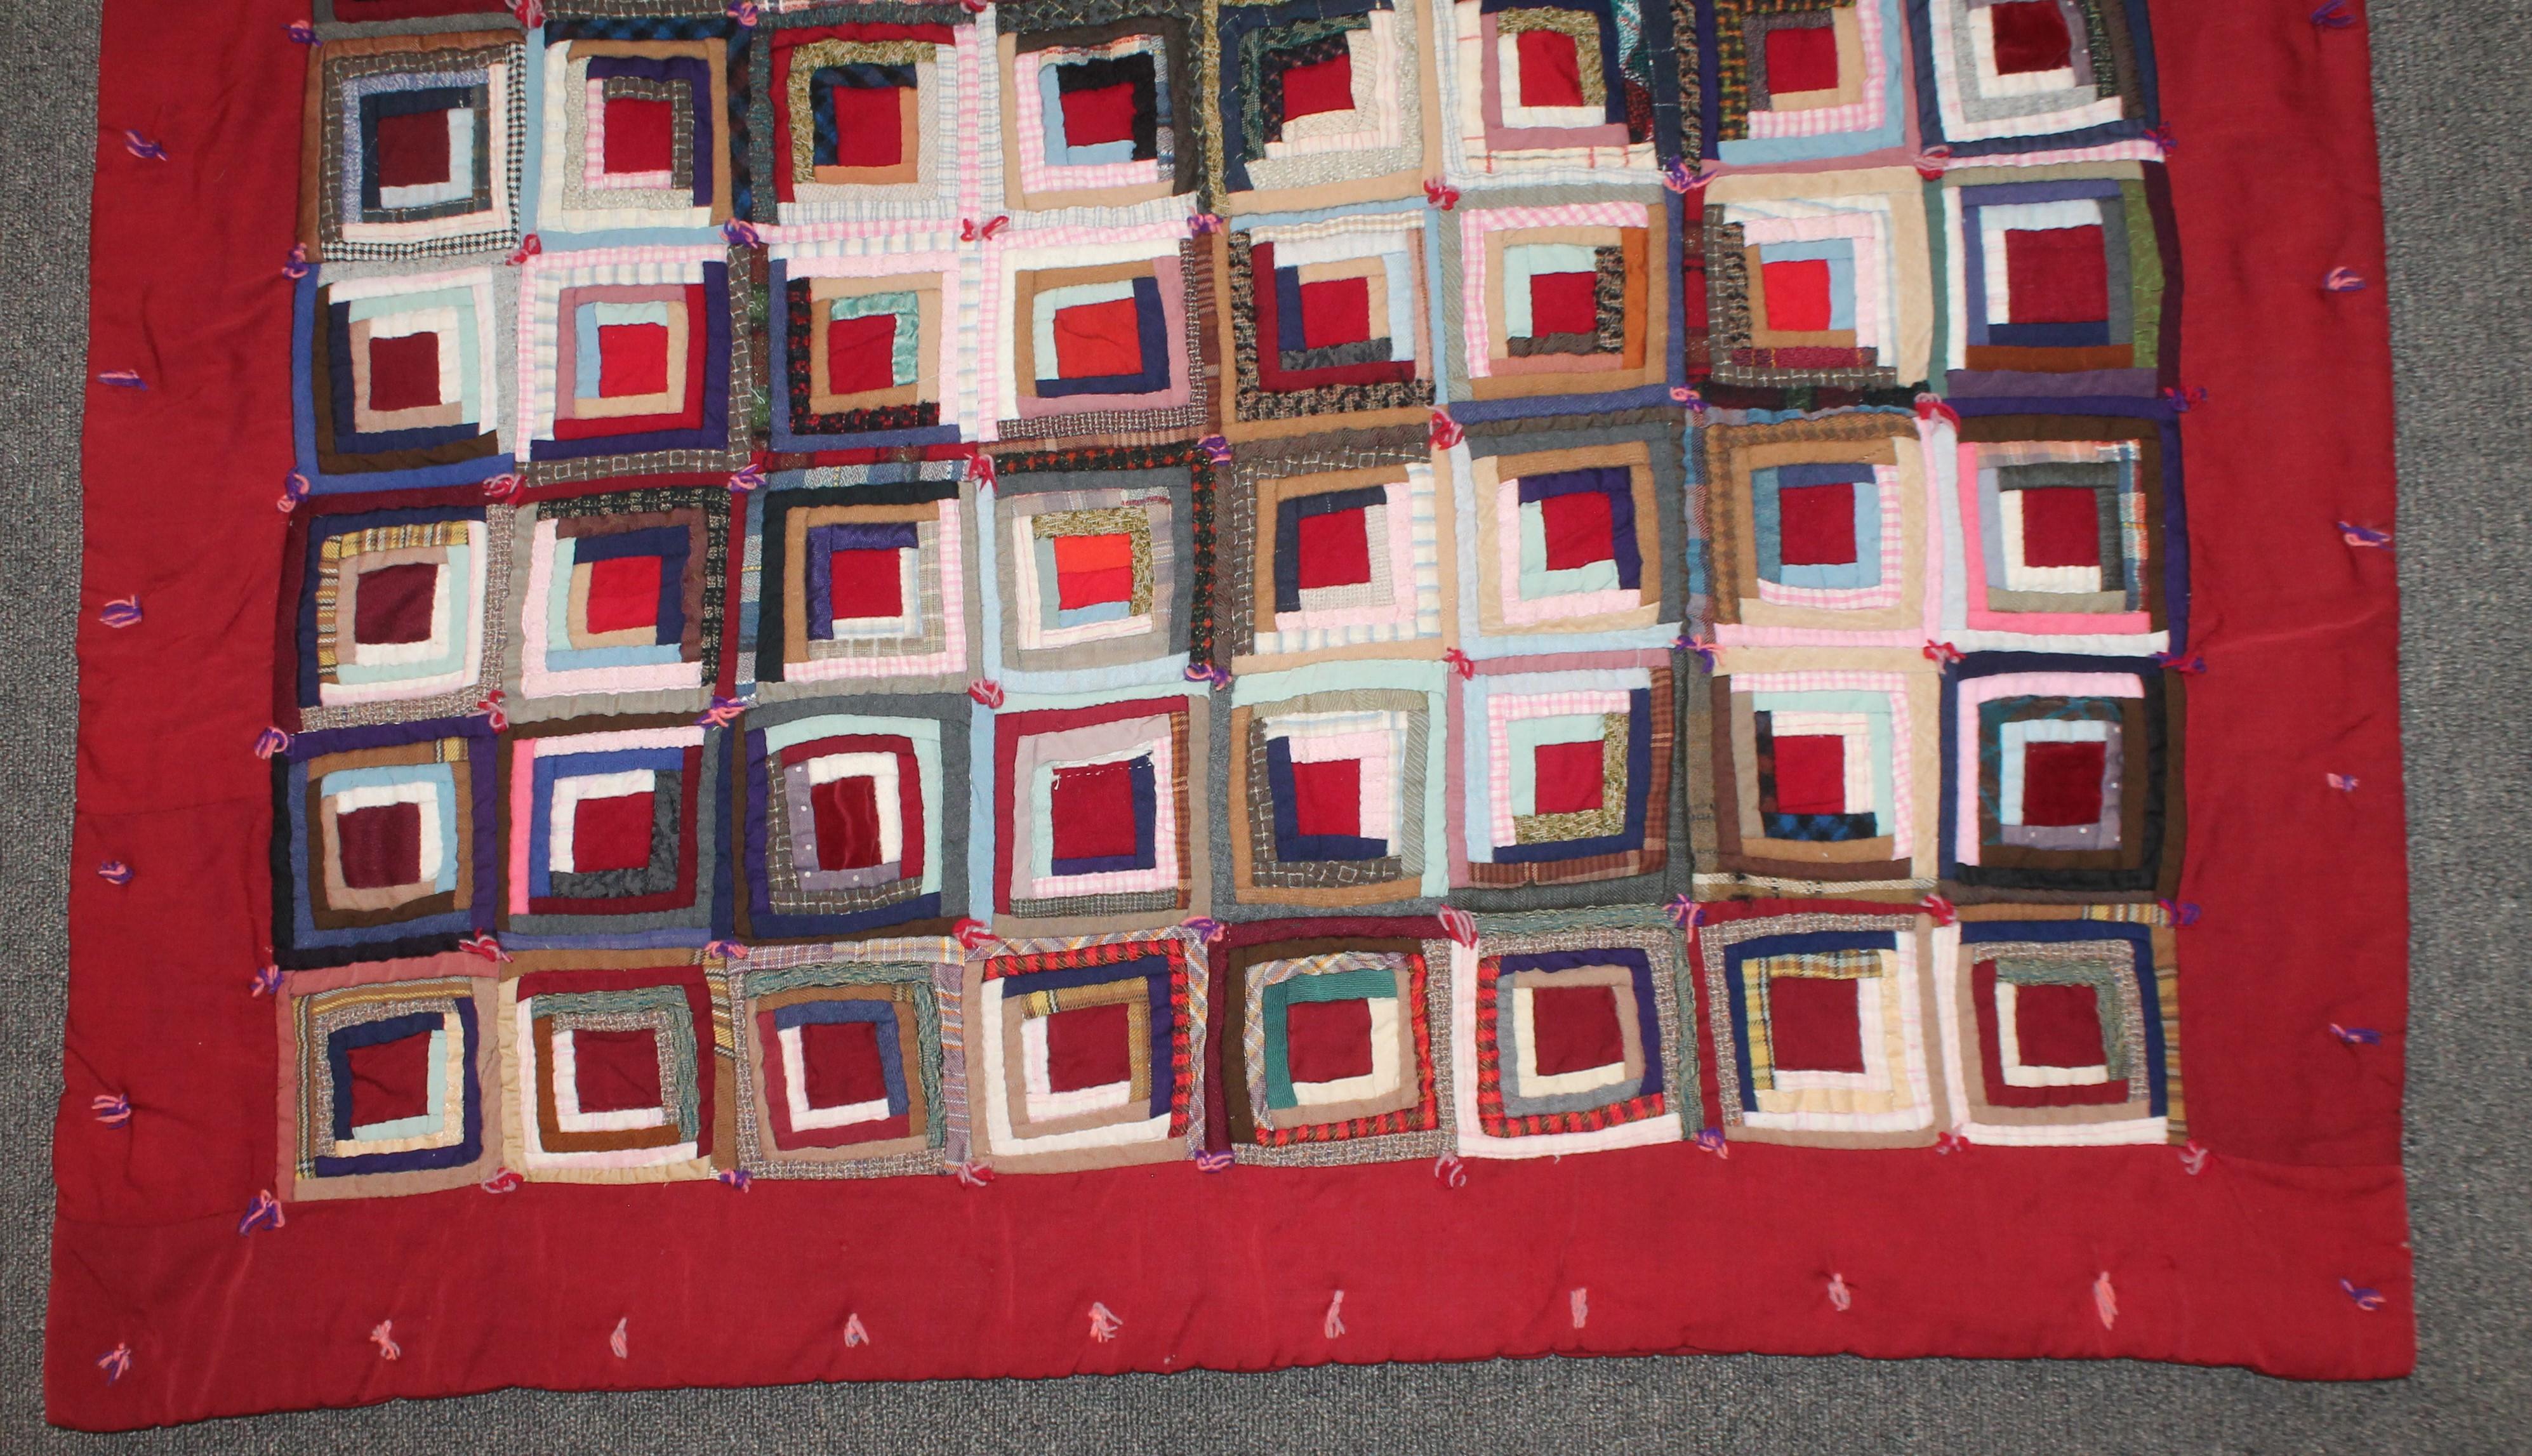 This fine Pennsylvania mini pieced crib quilt is all in wool and tiny ties and piecework. The condition is very good.